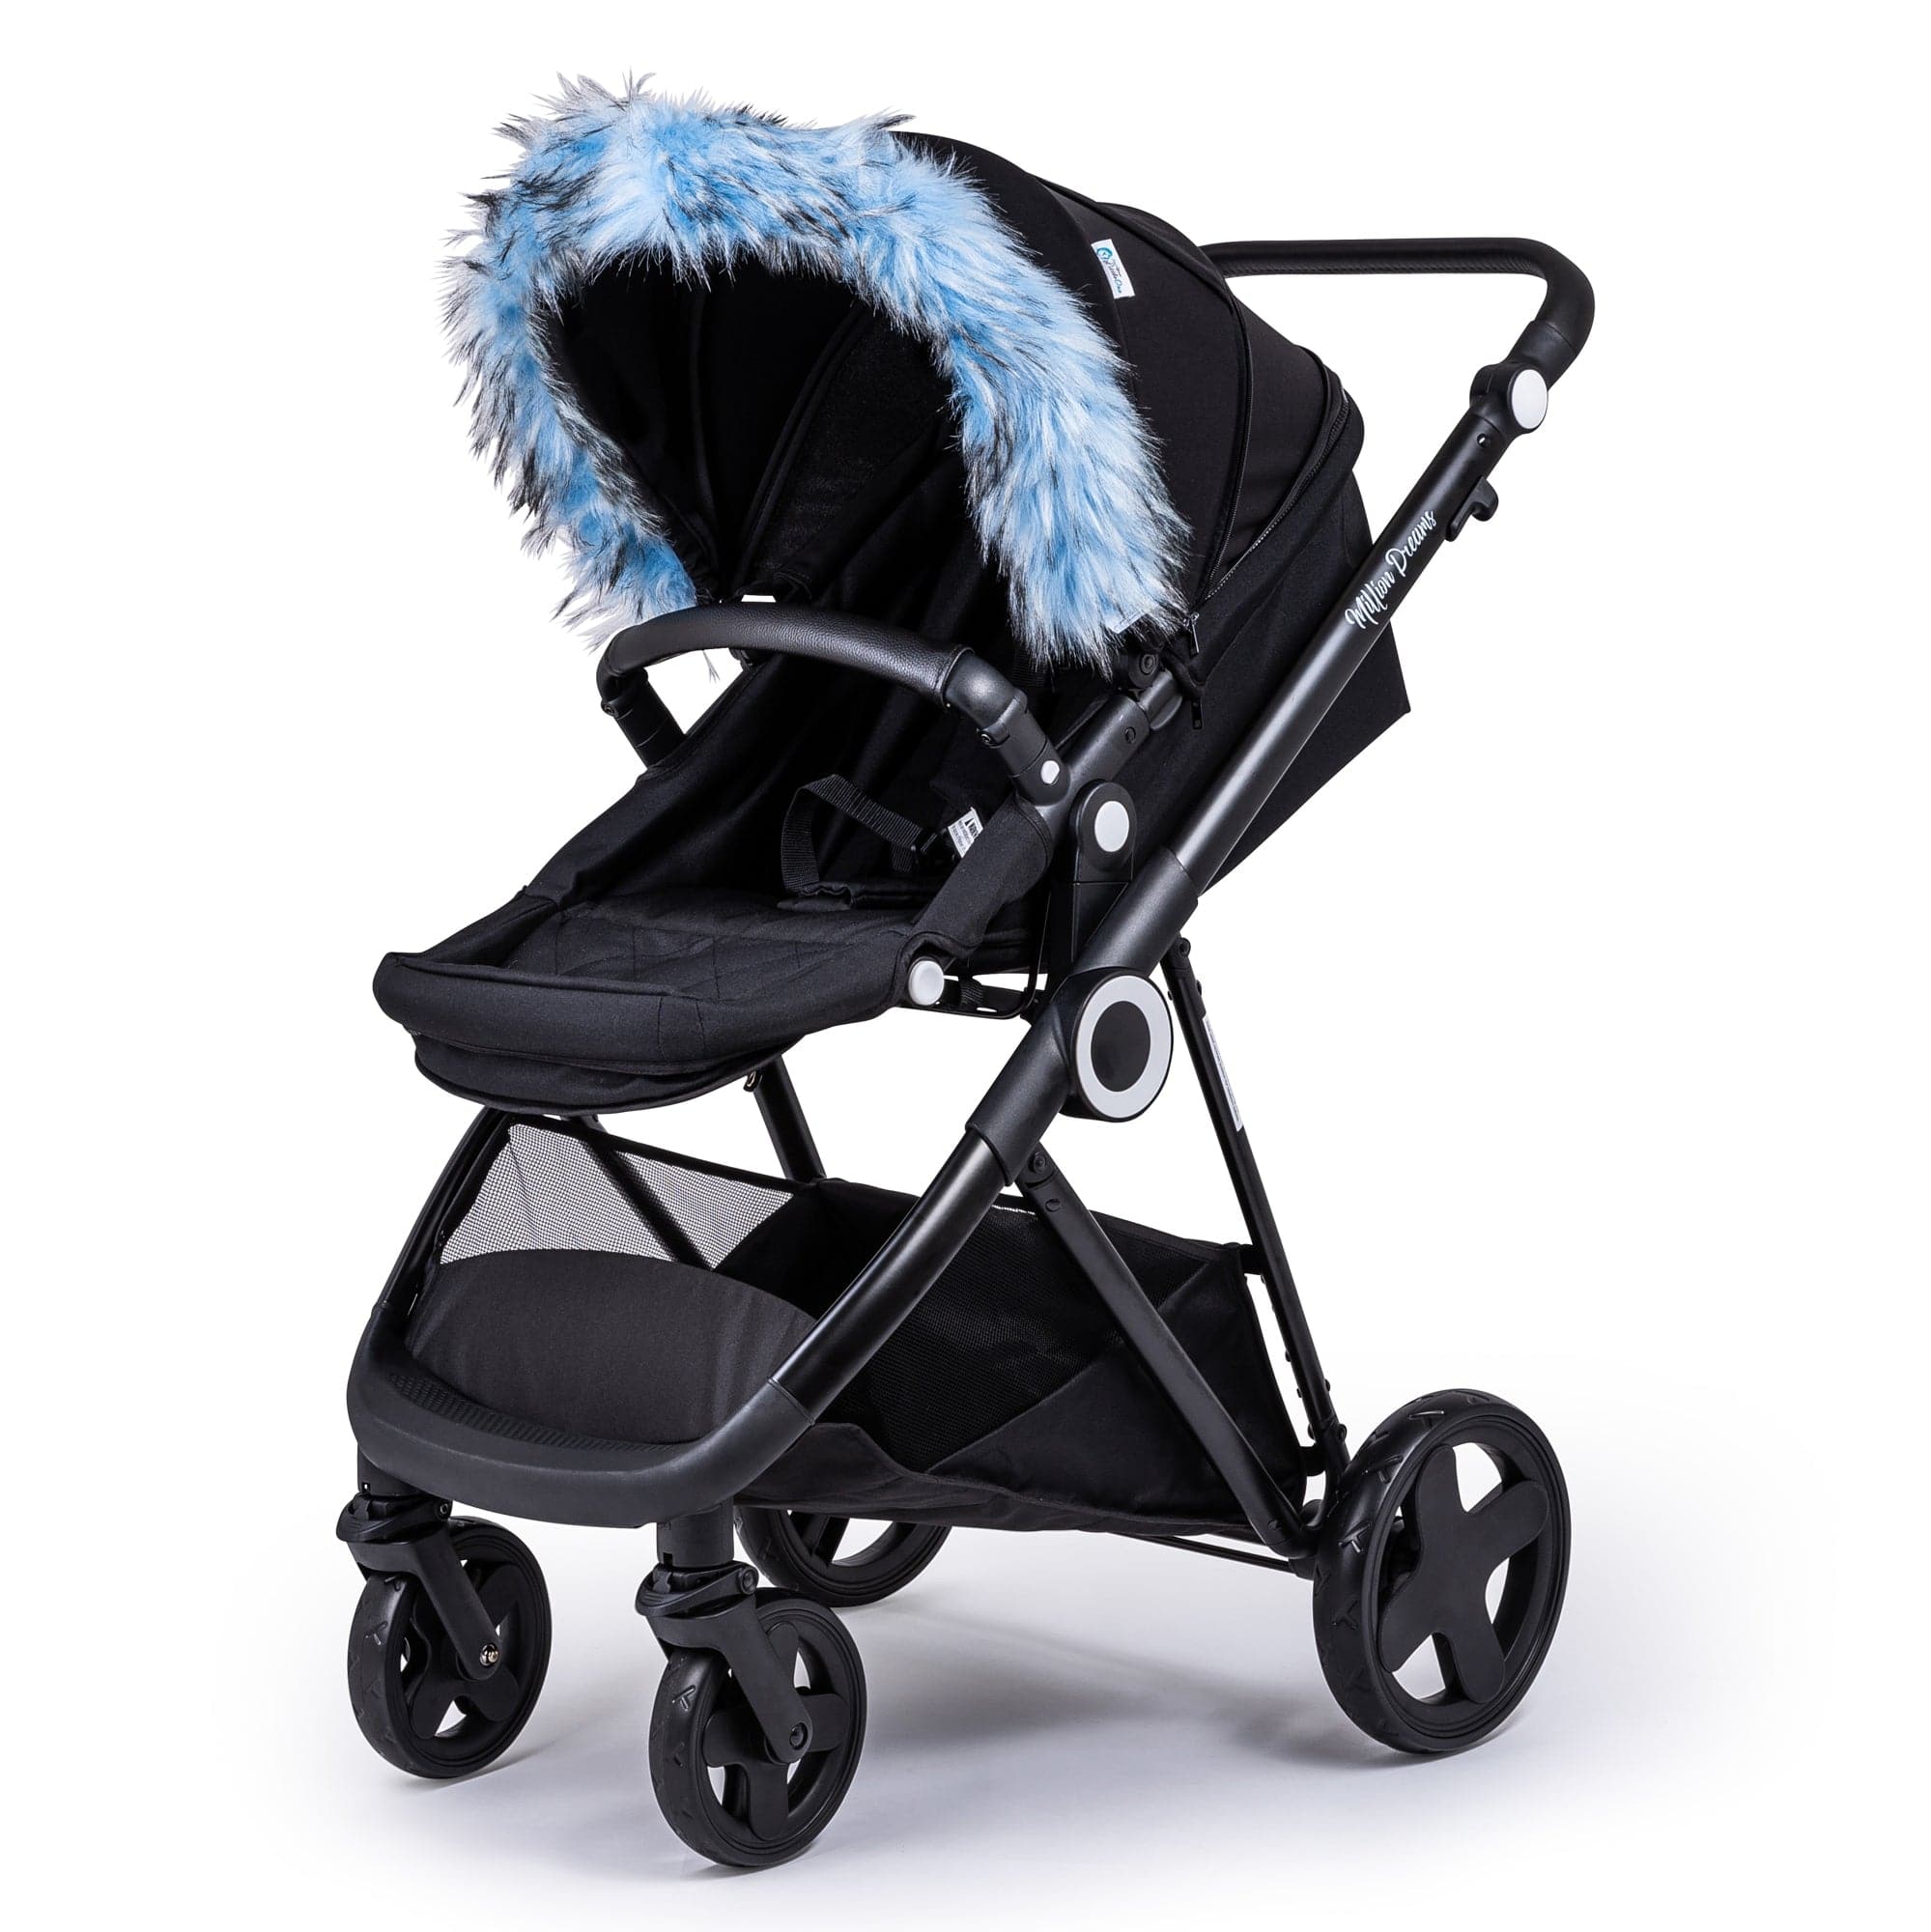 Pram Fur Hood Trim Attachment for Pushchair Compatible with Out 'n' About - Light Blue / Fits All Models | For Your Little One